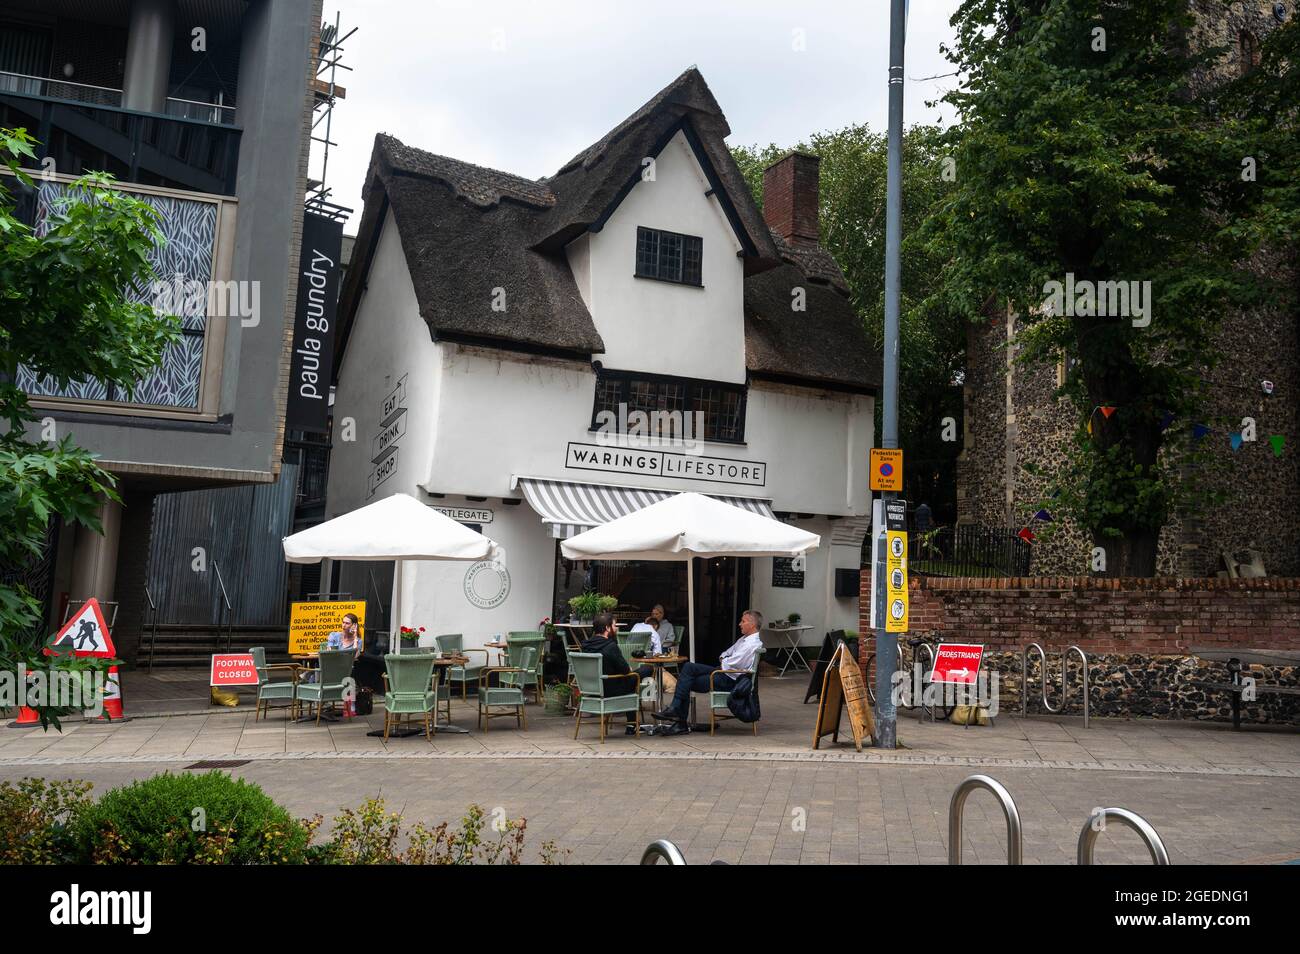 A view of a Thatched building in Westlegate Norwich City centre being used as a Warings home furniture shop as well as a cafe with seating outside. Stock Photo